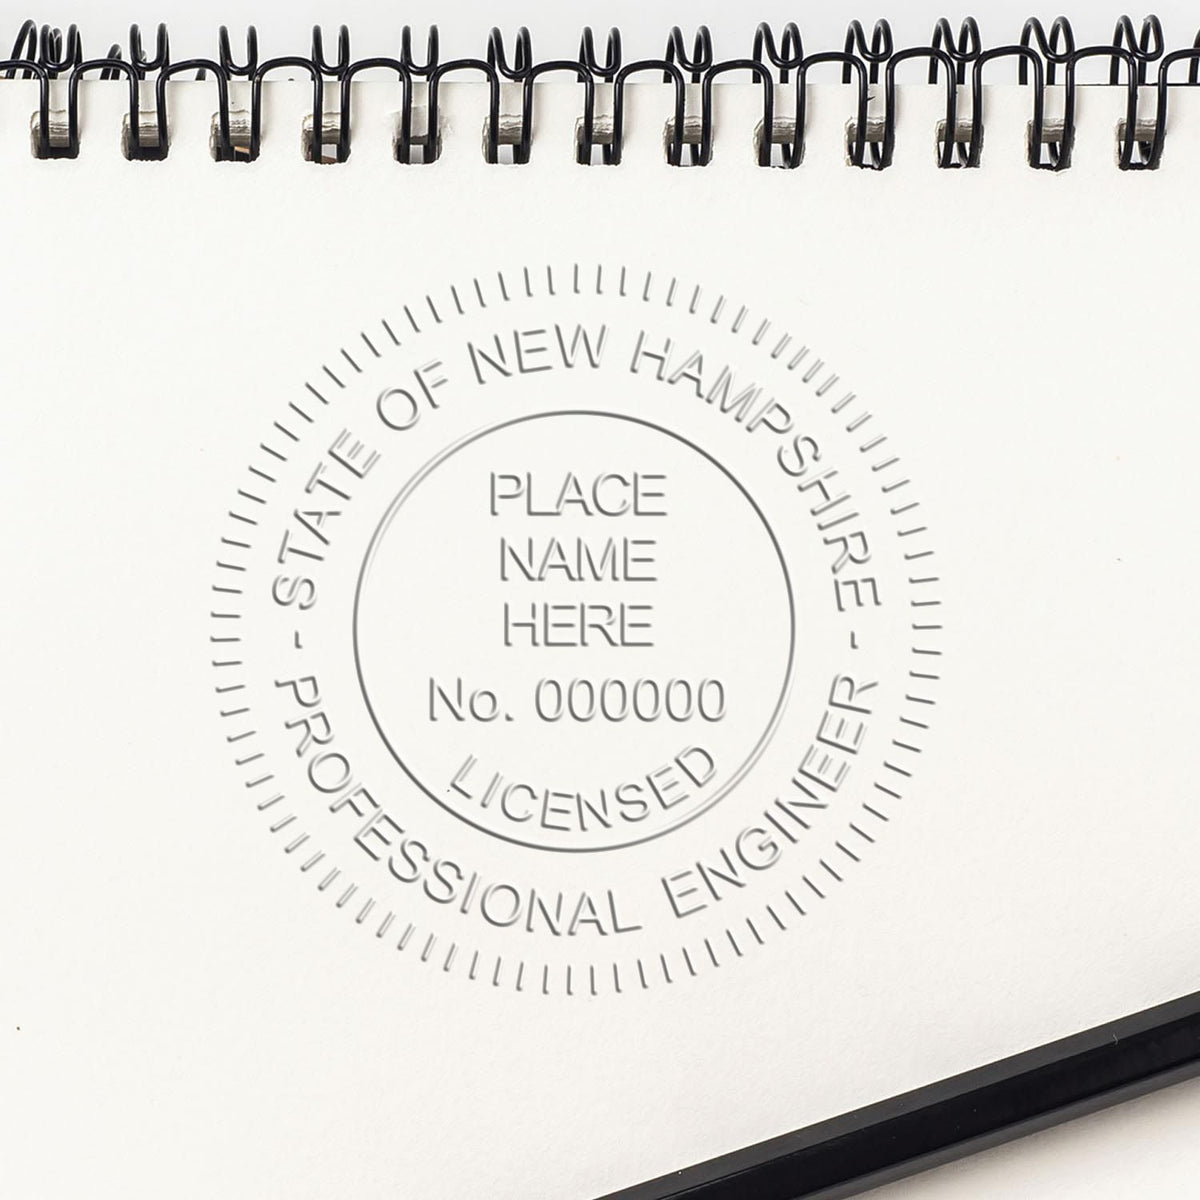 A stamped impression of the Long Reach New Hampshire PE Seal in this stylish lifestyle photo, setting the tone for a unique and personalized product.